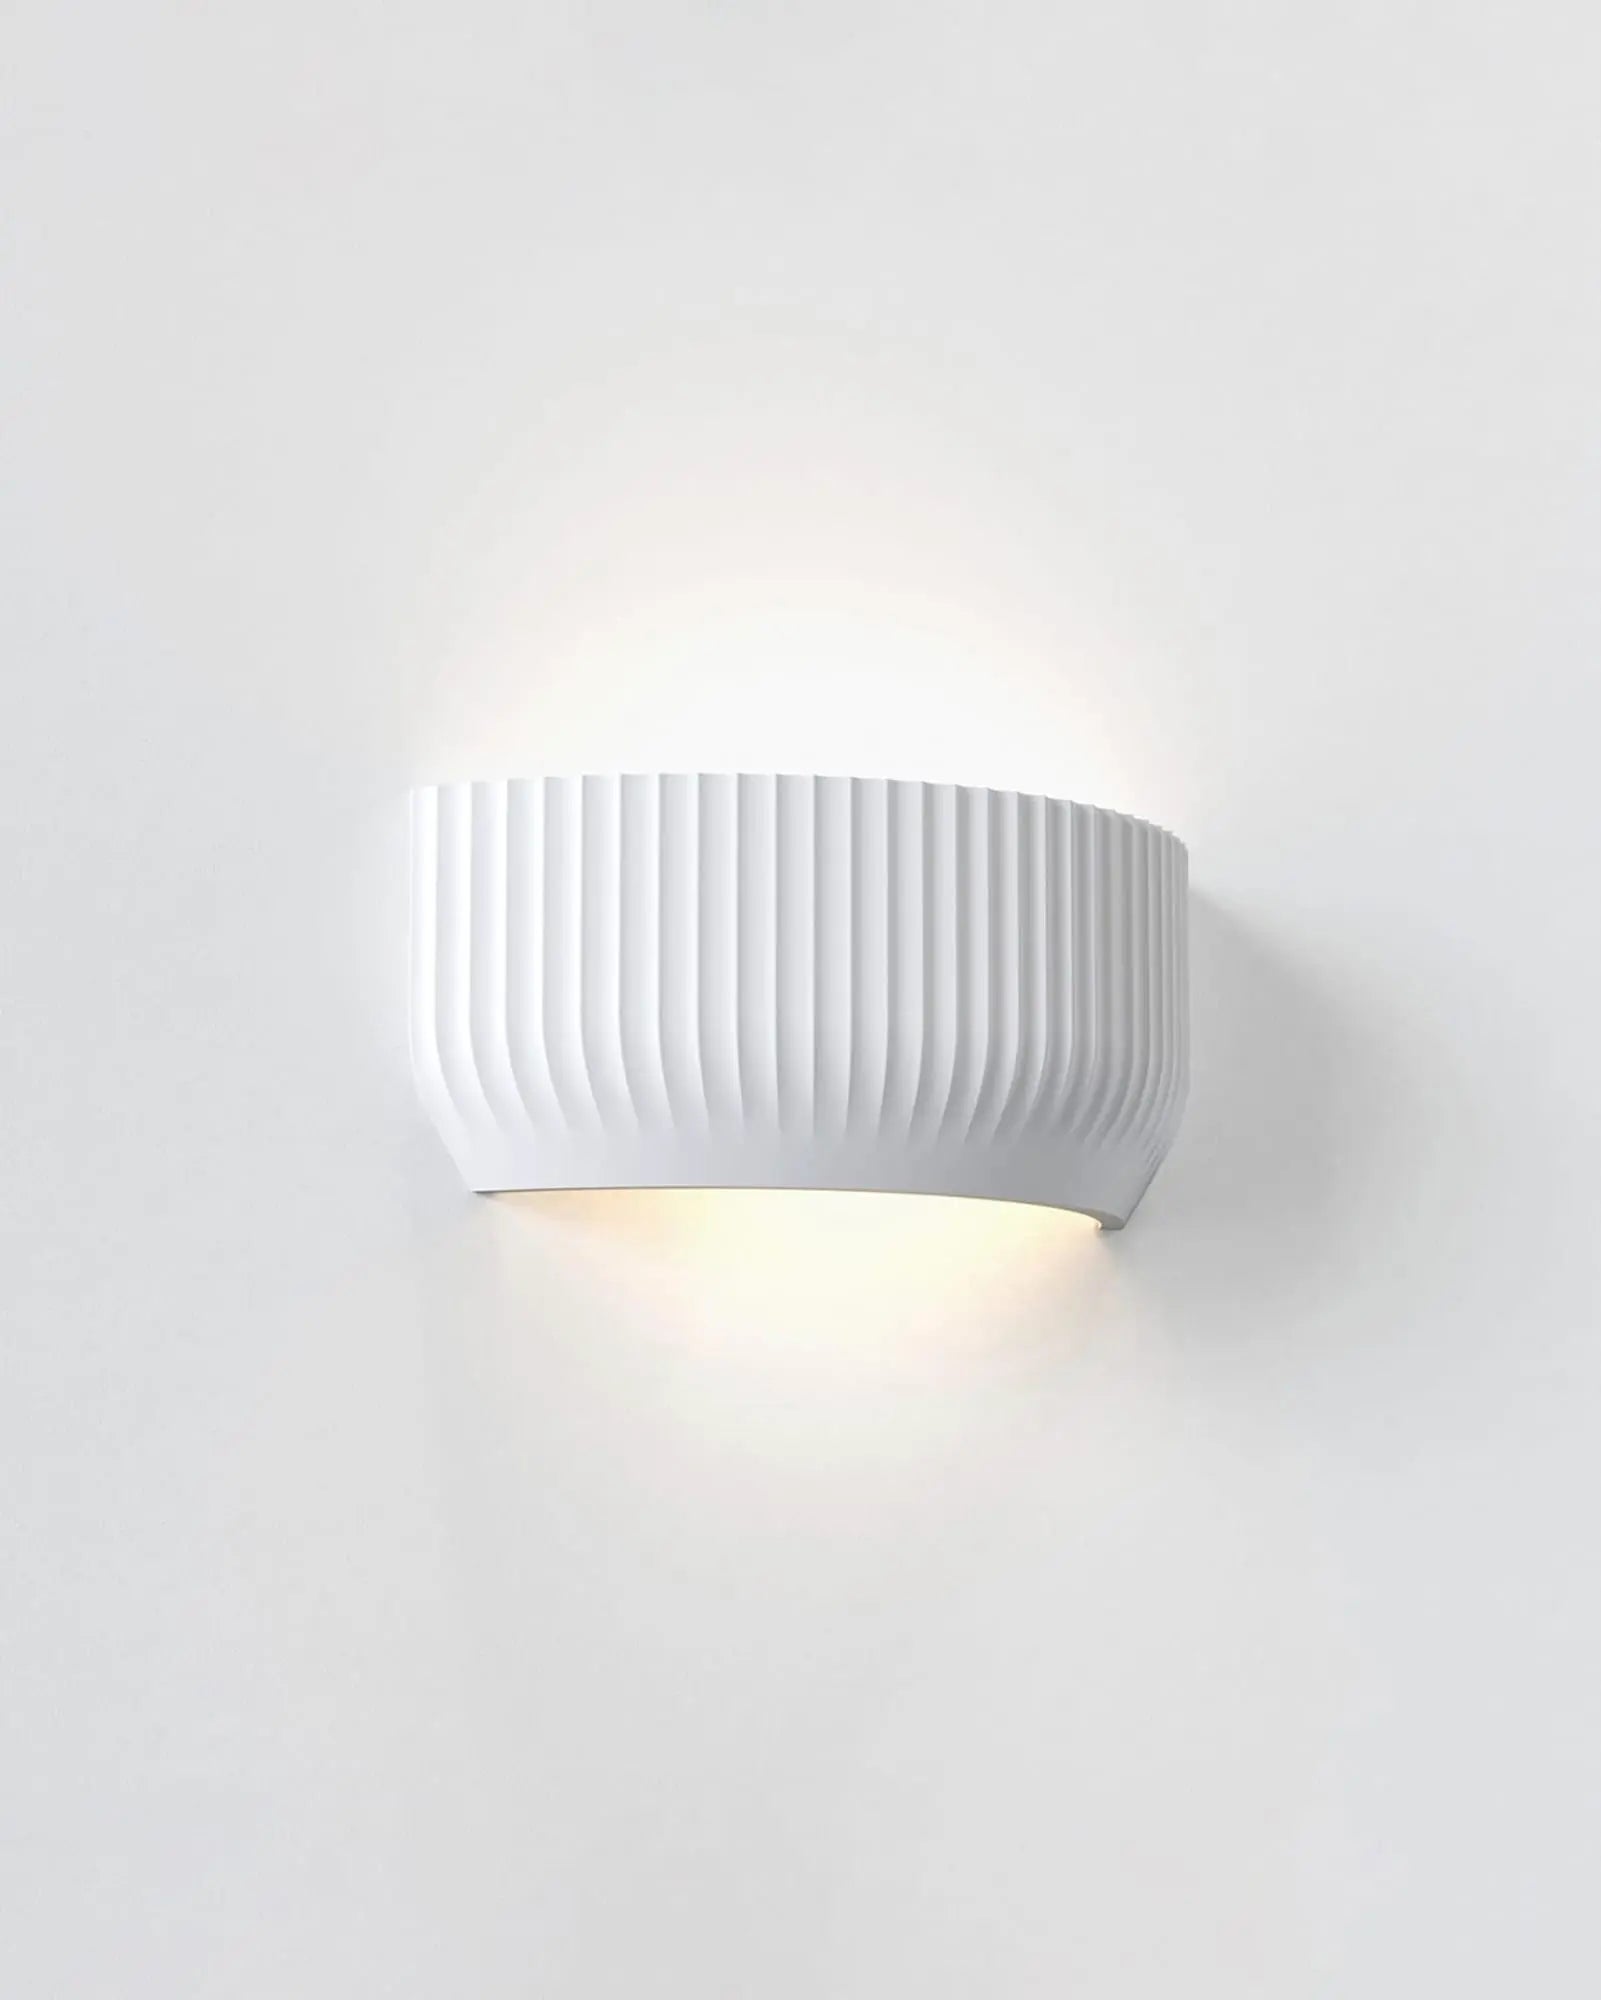 Blend plaster contemporary architectural style wall light product photo